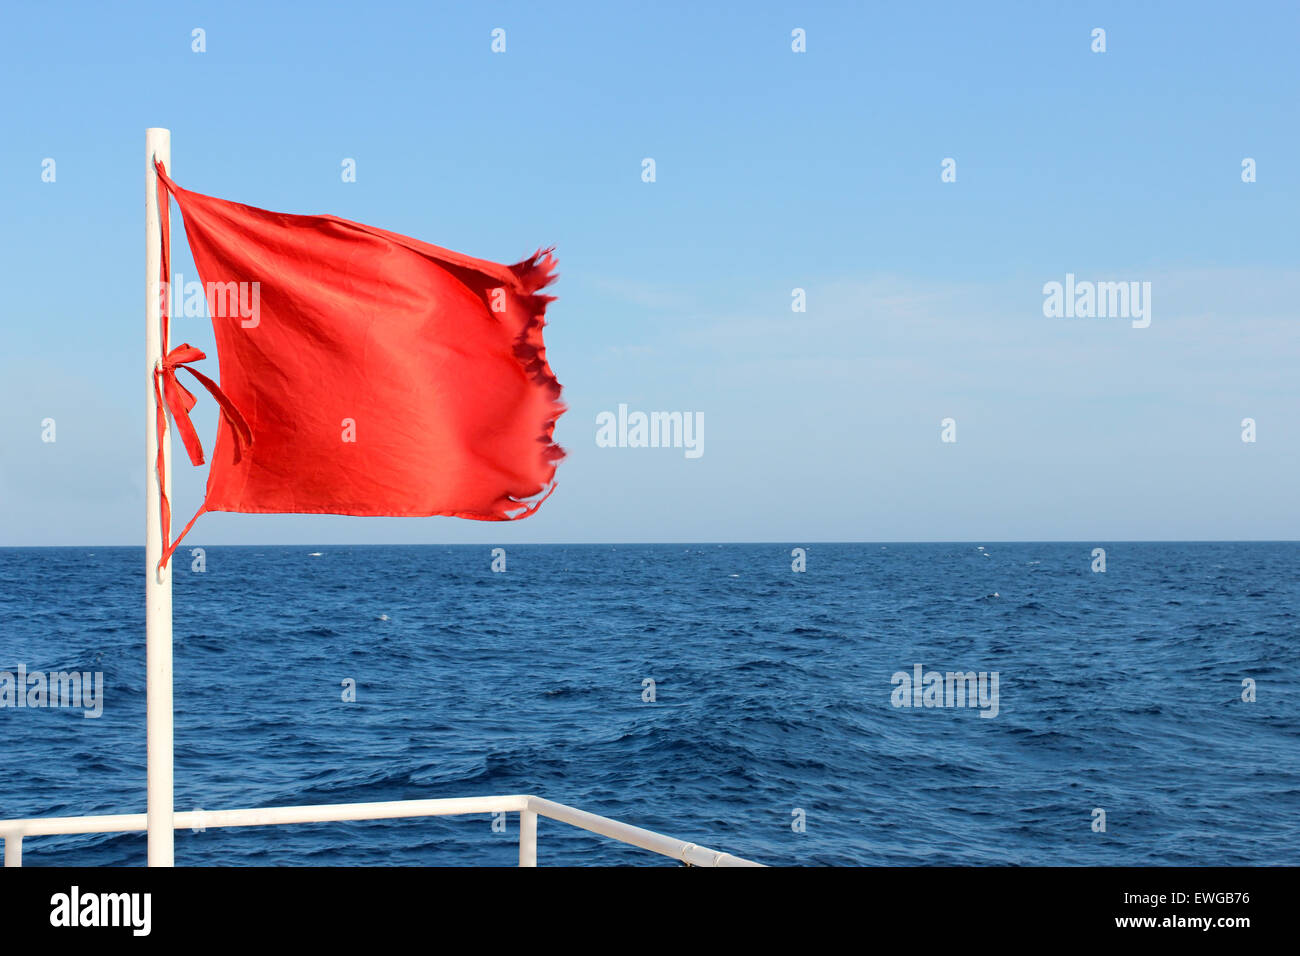 Red flag flying in the background of the sea, warning of the increasing wind and waves. Stock Photo